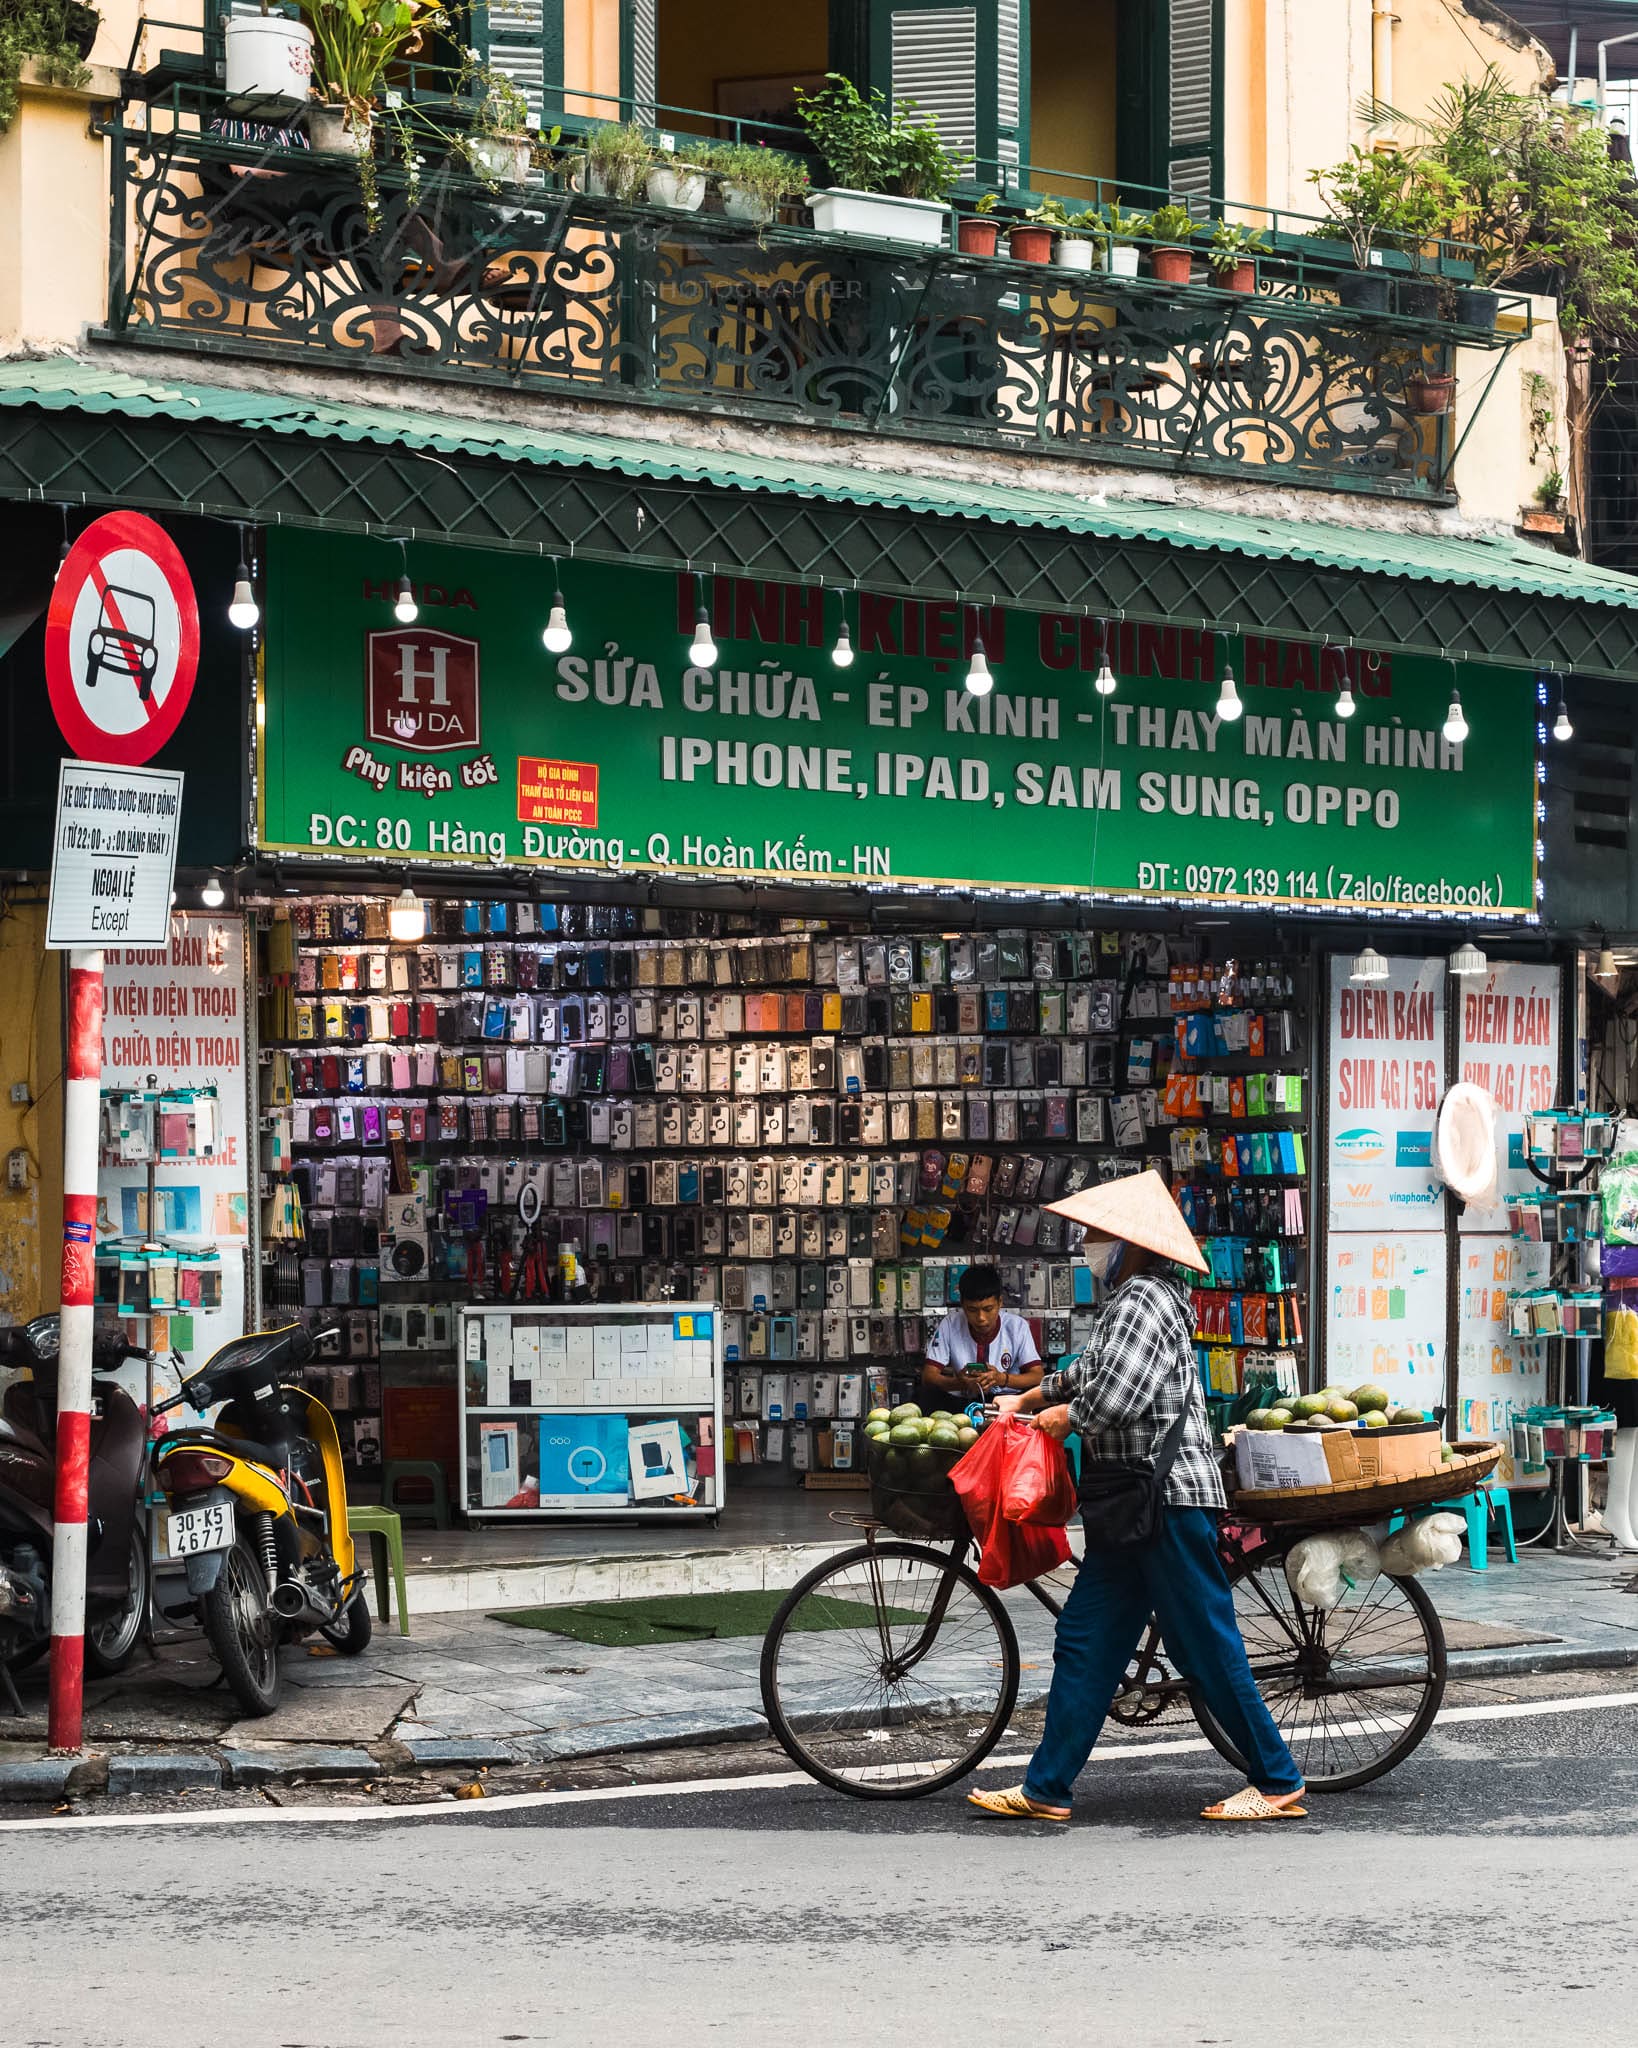 Hanoi Vietnam electronics shop with vibrant phone cases and traditional street vendor.